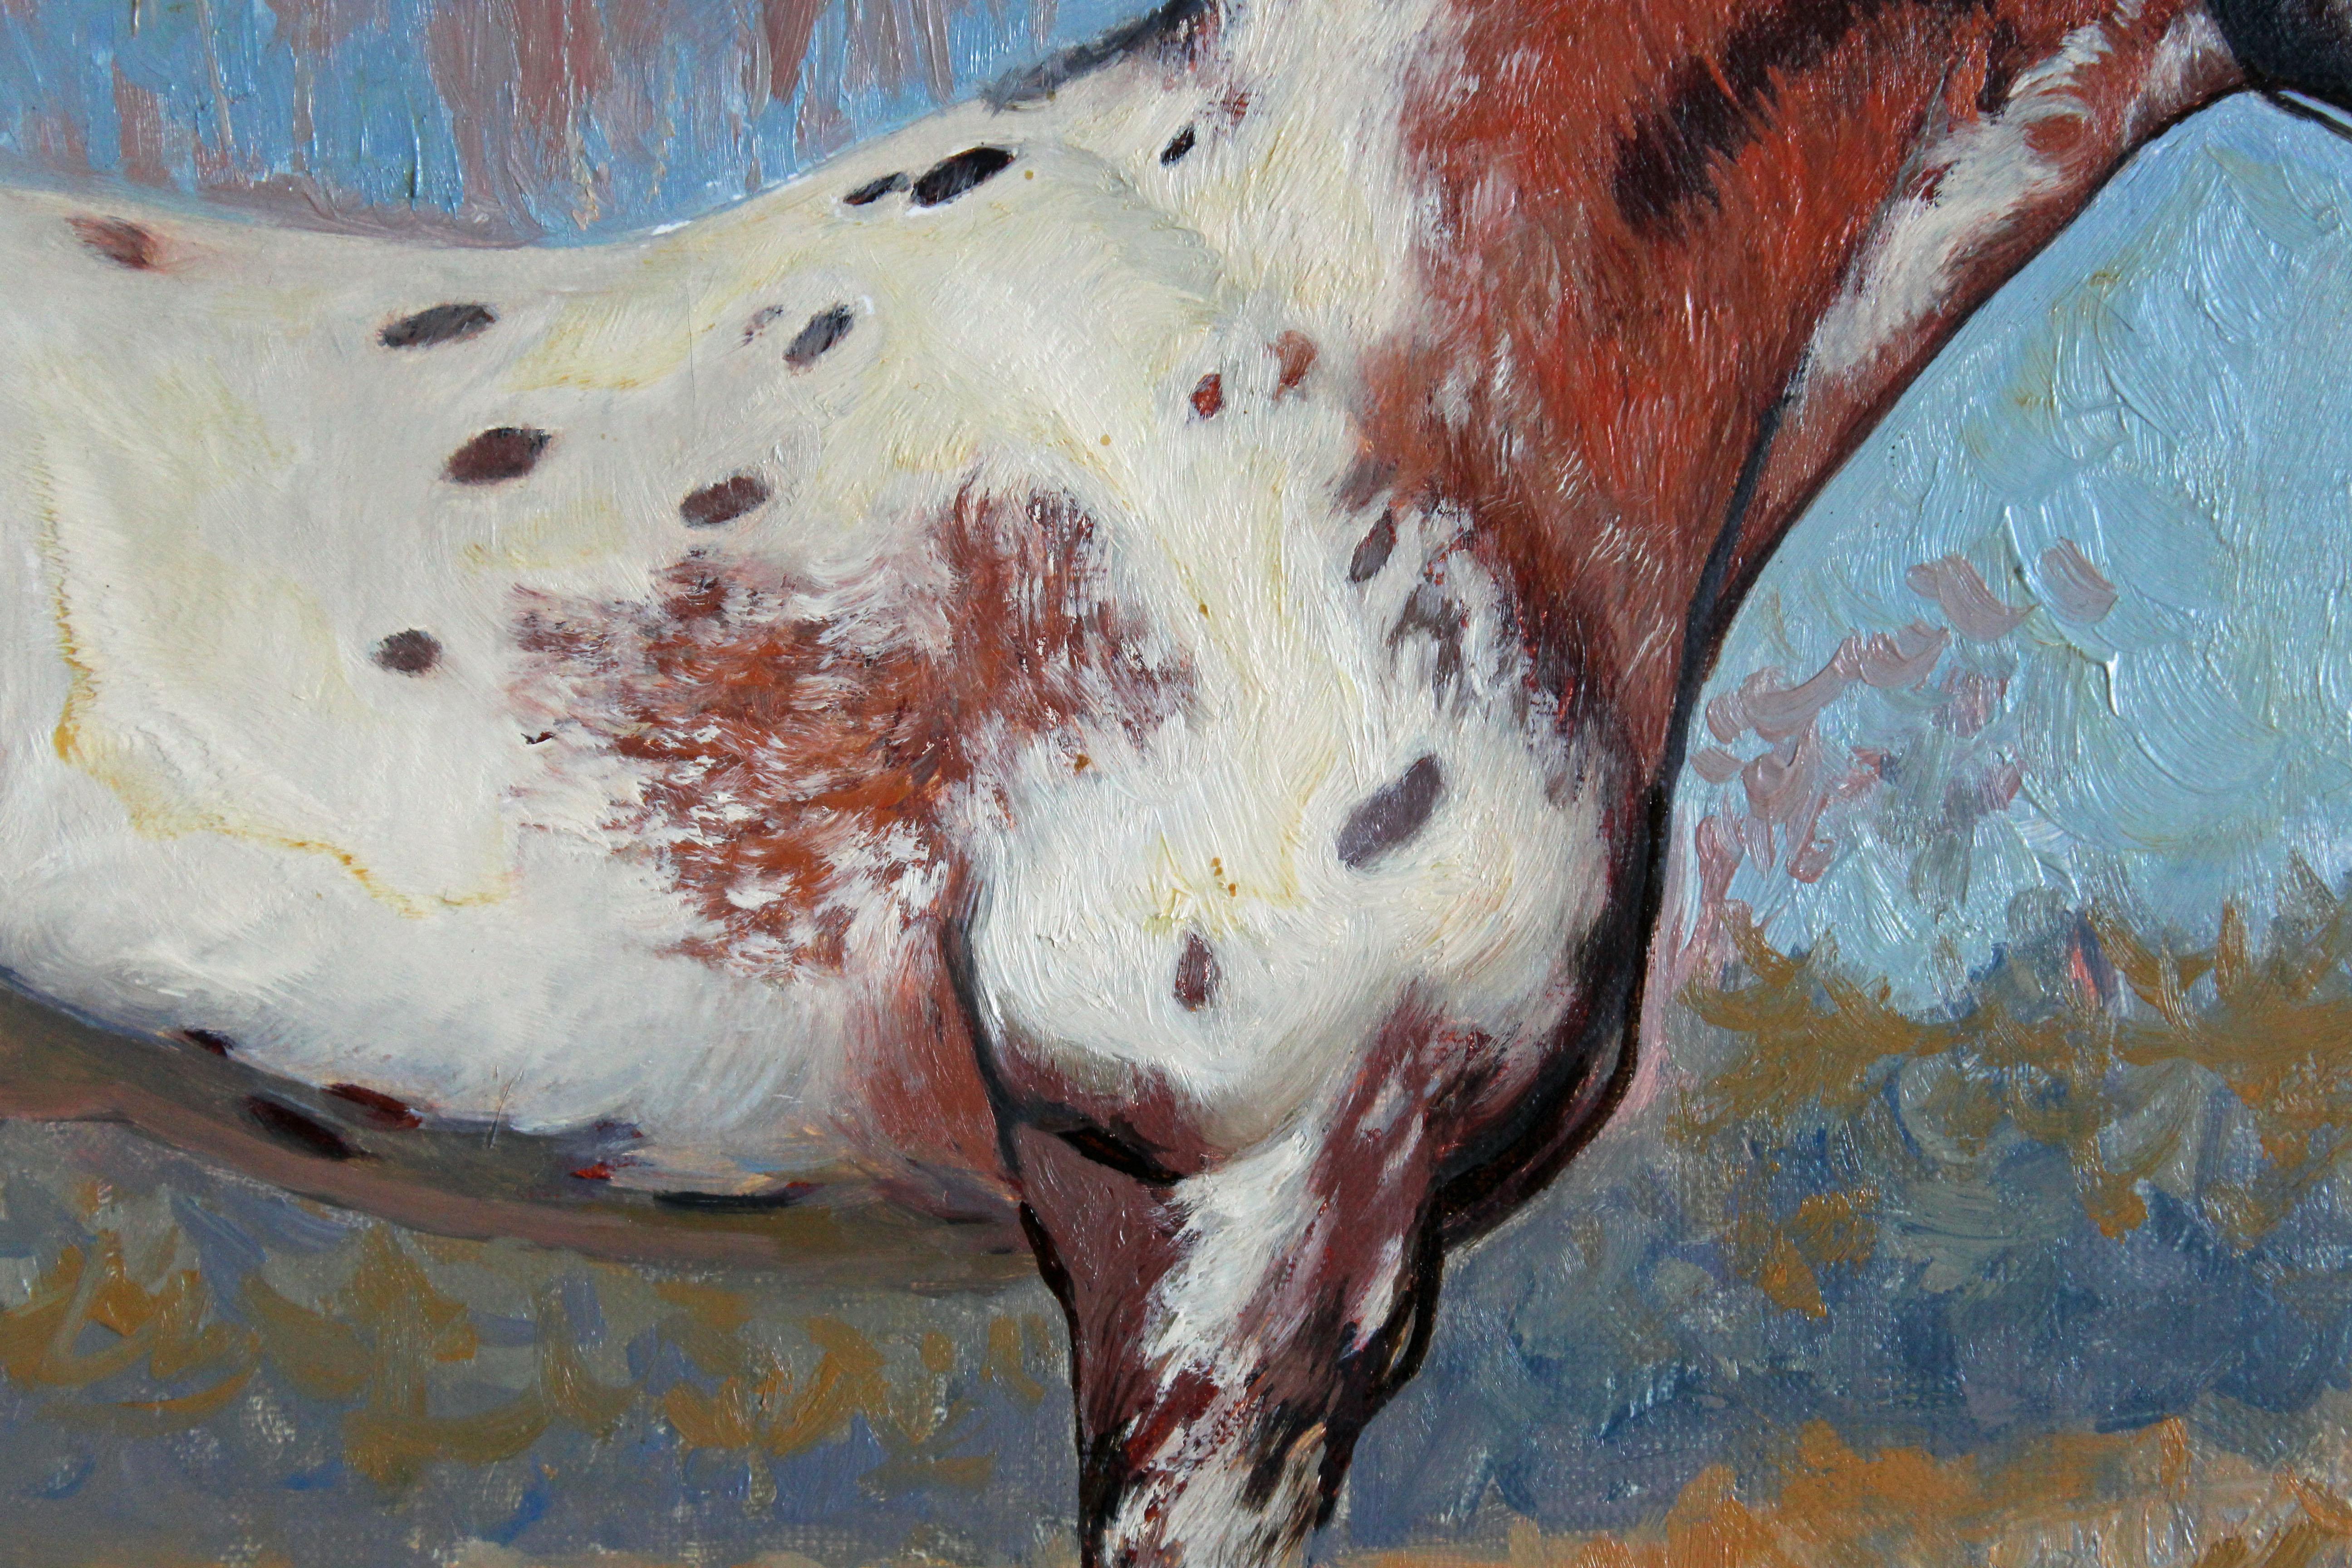 PLEASE NOTE: Shipping WITHOUT frame with DHL Service.

In this painting, I lovingly captured the unique spirit of the horse, its dappled coat a symbol of individuality. The rich oils blend fine art with touches of impressionism and realism,